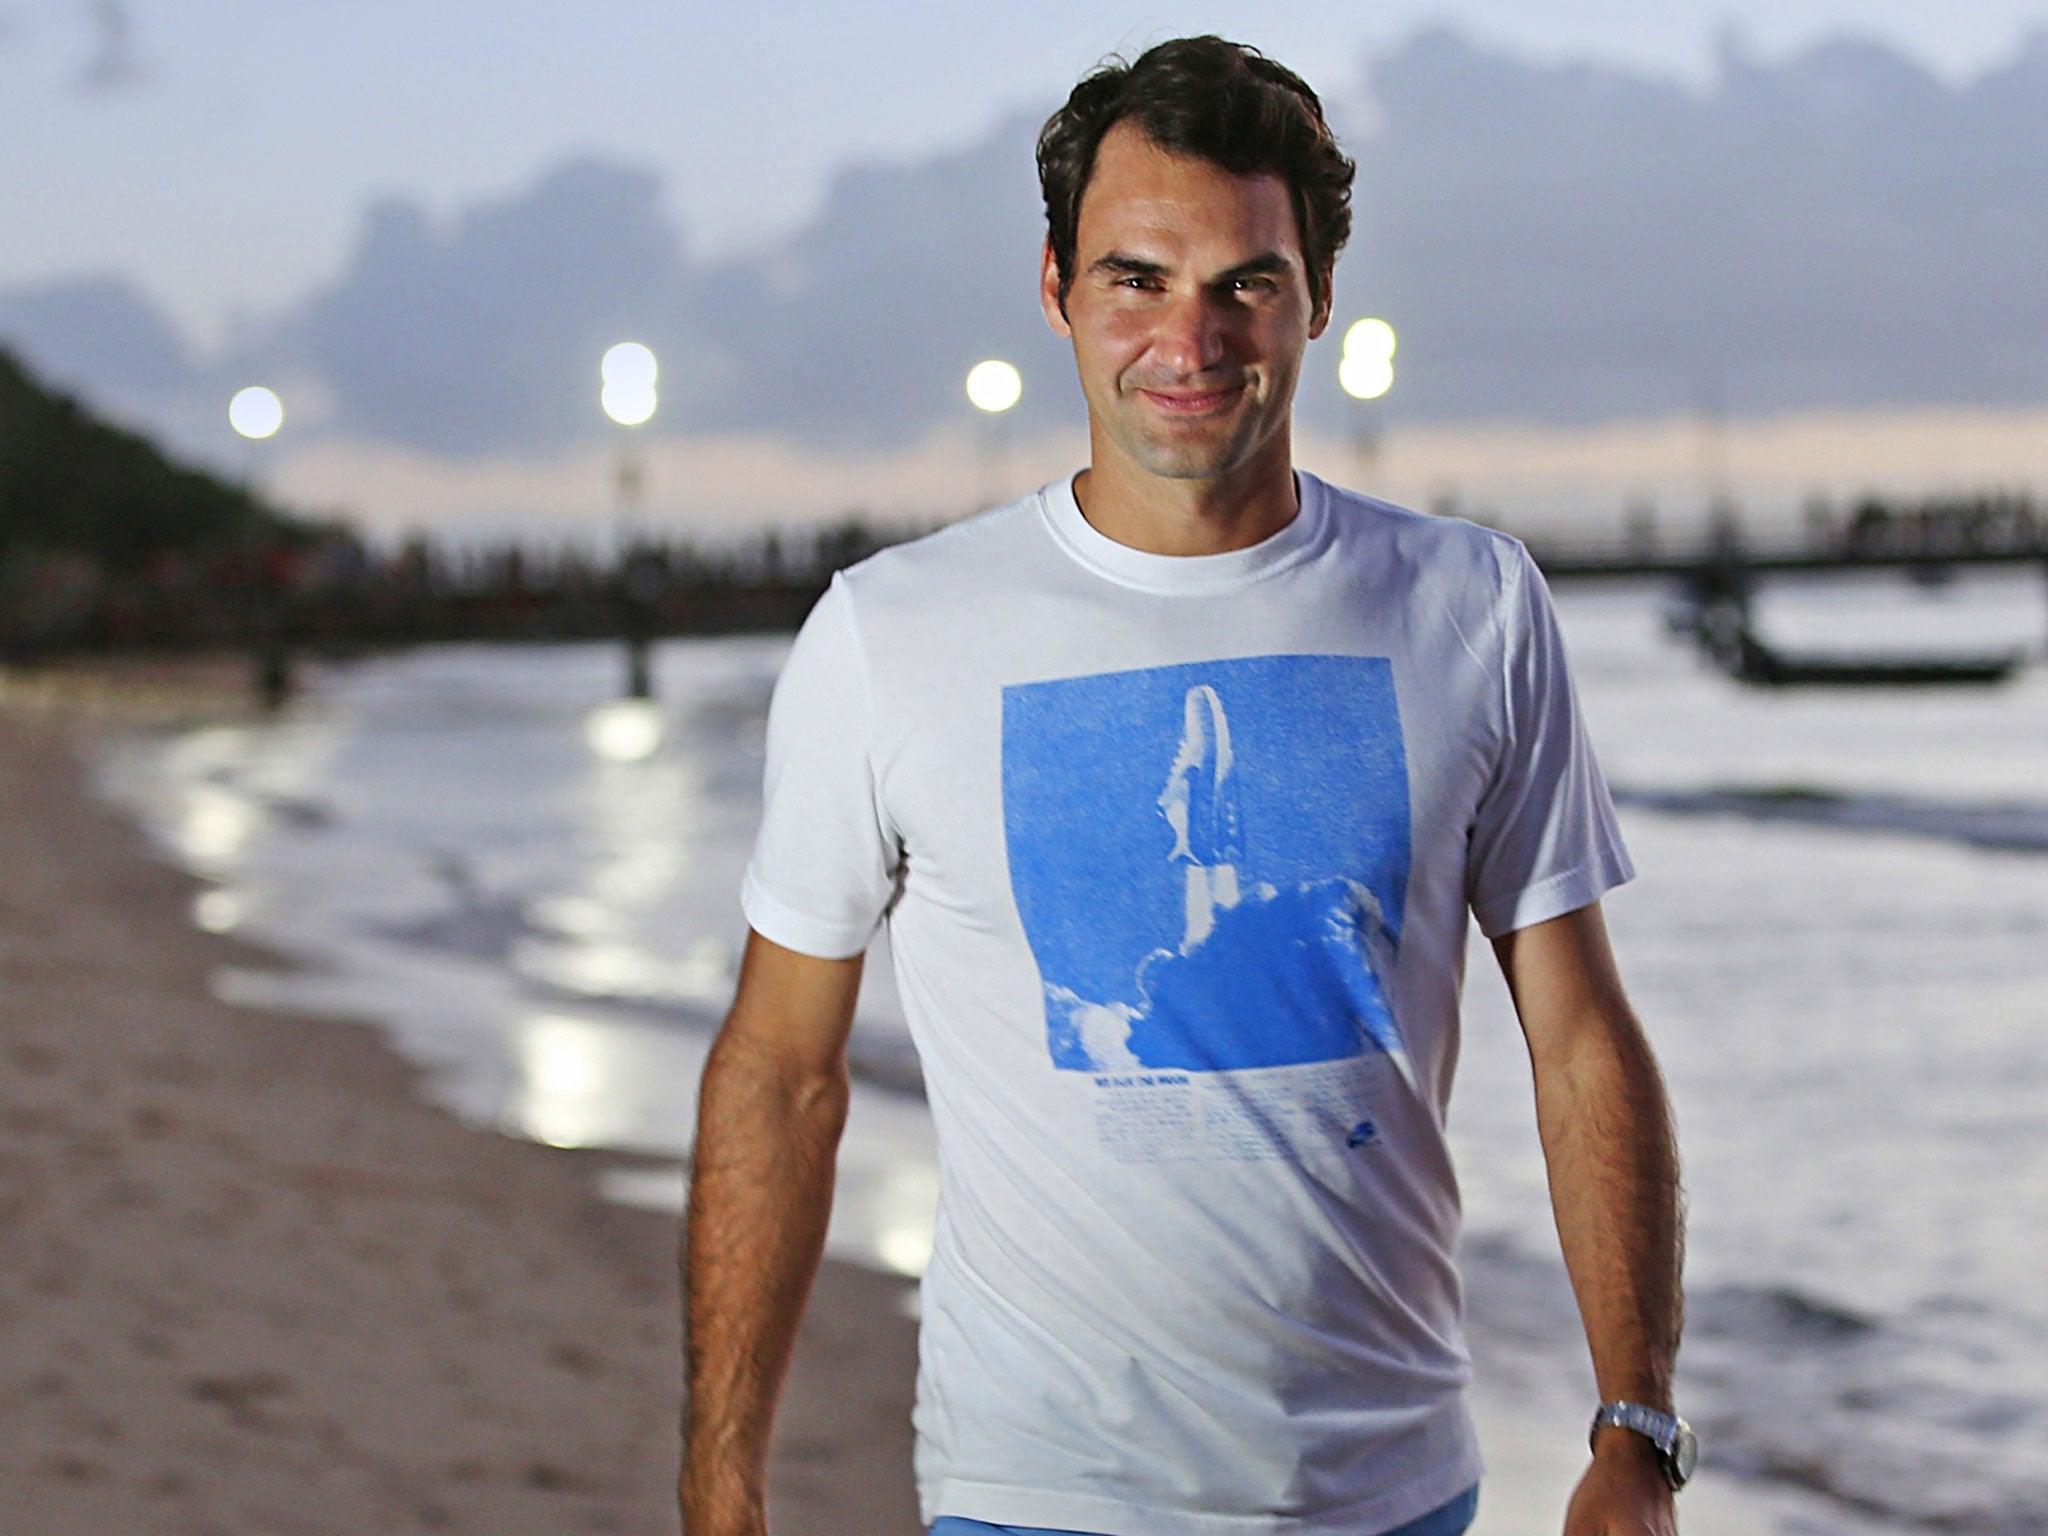 Roger Federer takes a stroll on the beach in the build-up to the Australian Open, which begins on Monday